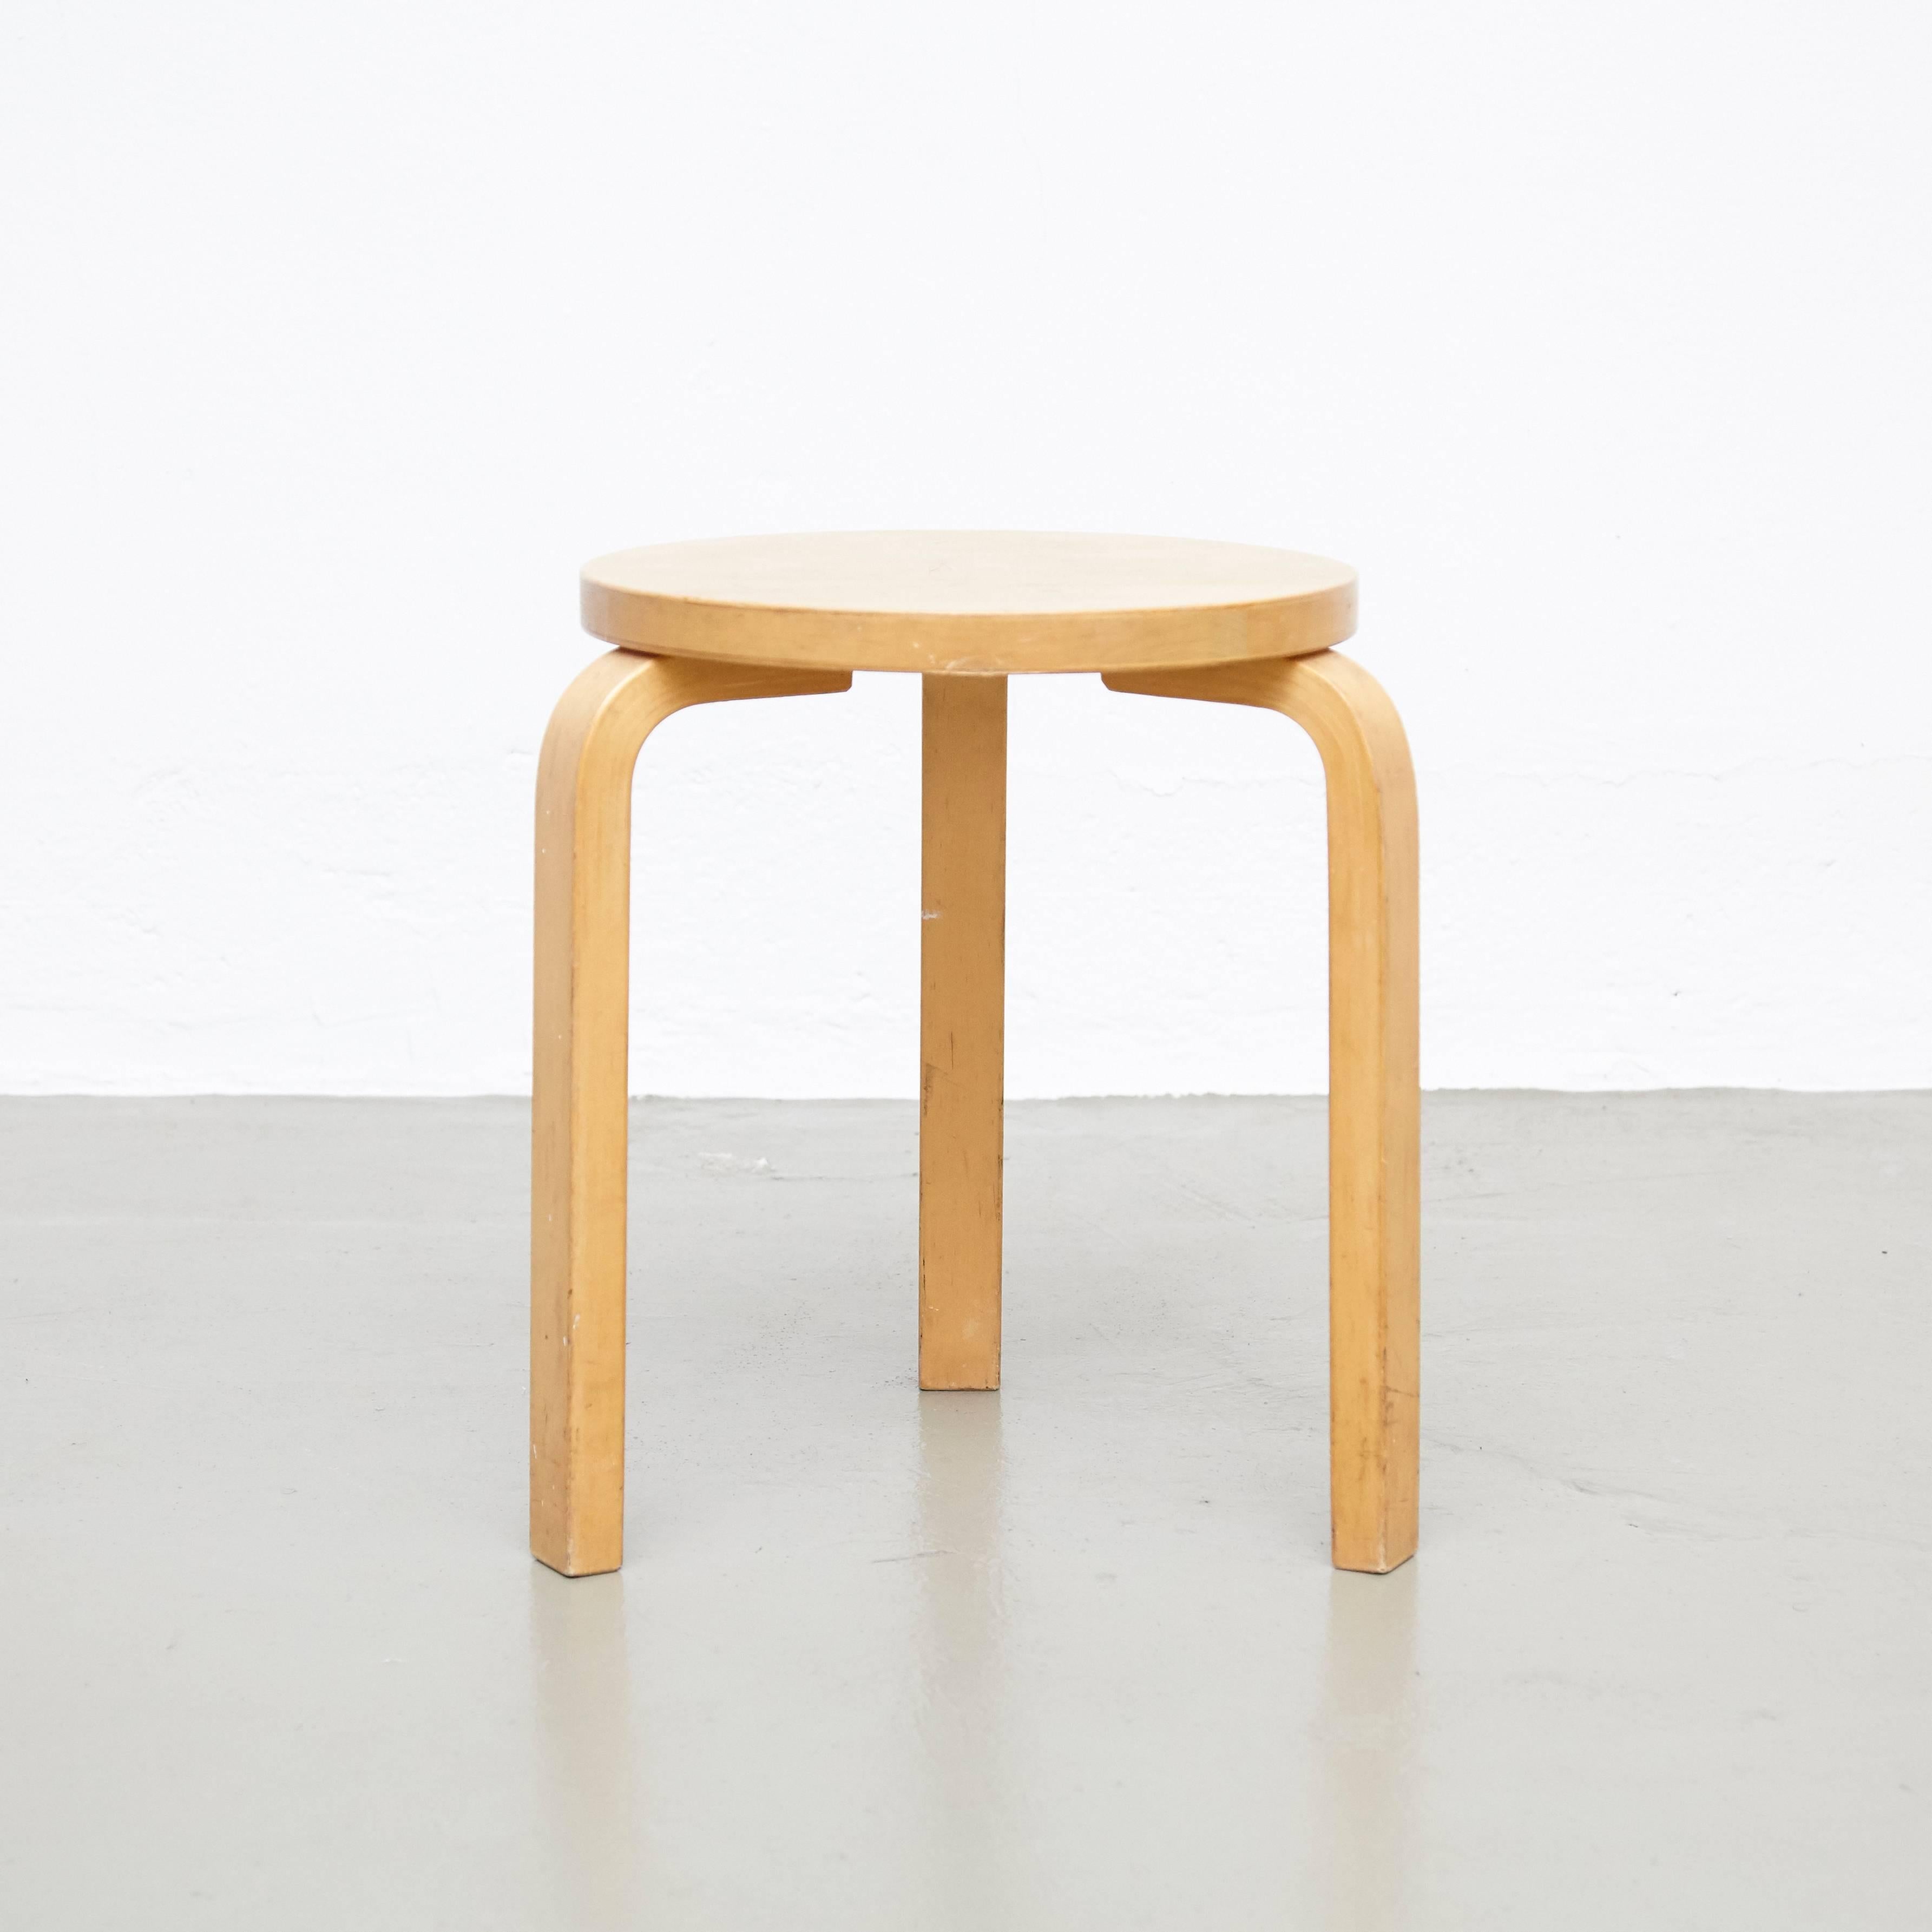 Stool designed by Alvar Aalto, circa 1960.
Manufactured by Artek (Finland).

Wood legs and structure.

In great original condition, with minor wear consistent with age and use, preserving a beautiful patina.

Hugo Alvar Henrik Aalto